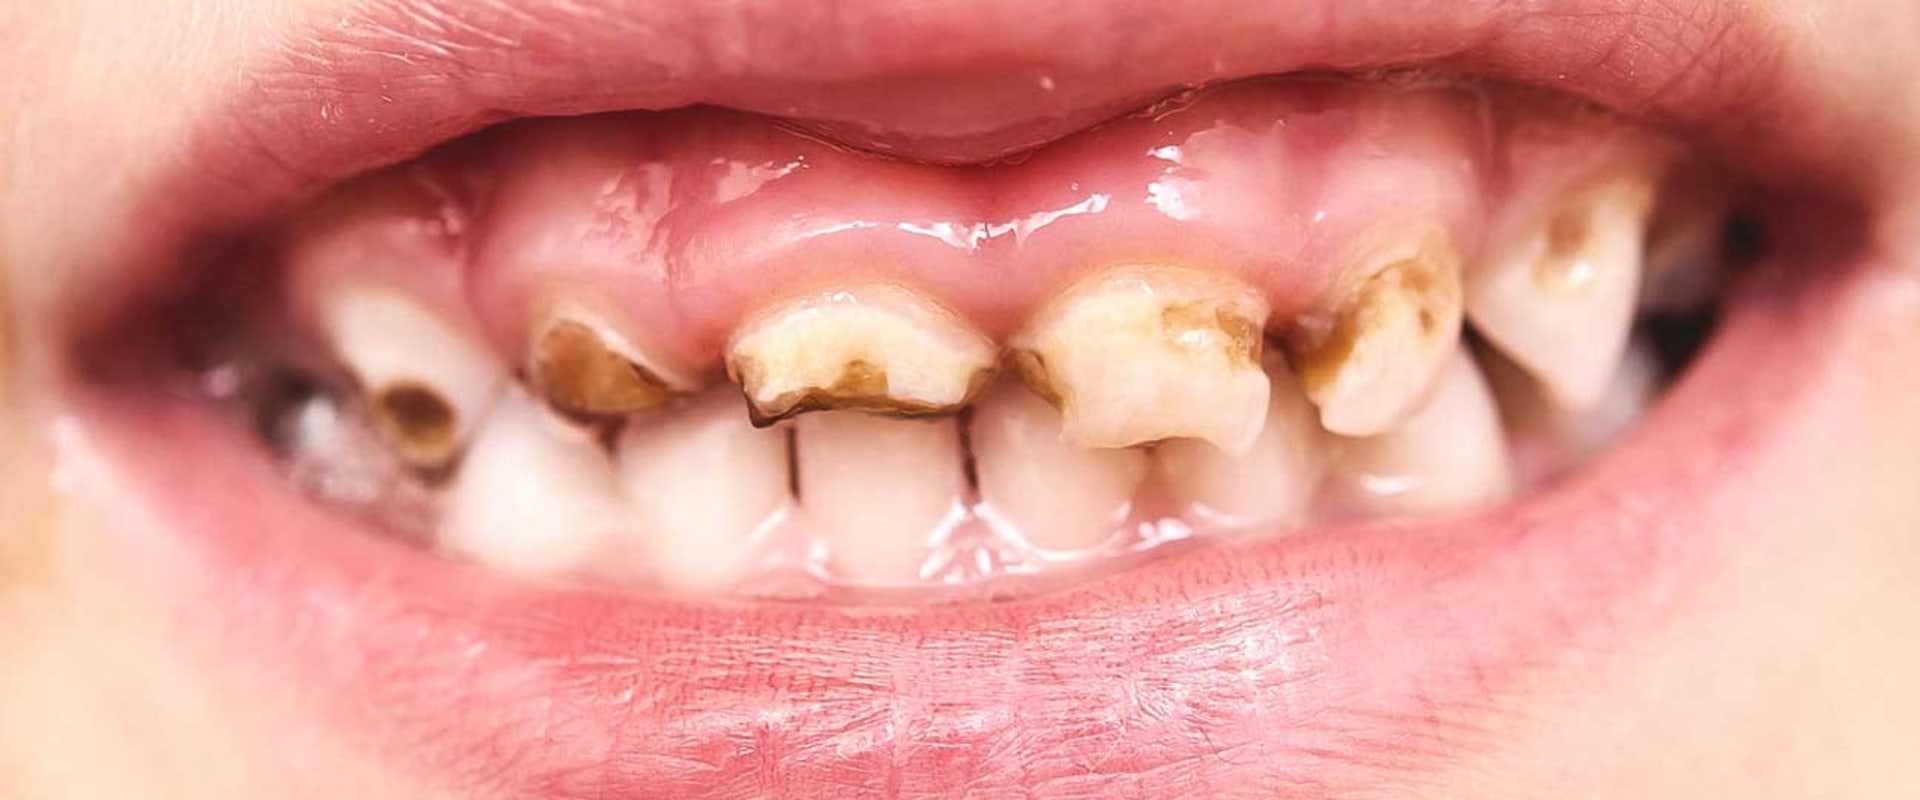 What happens when a child has rotten teeth?